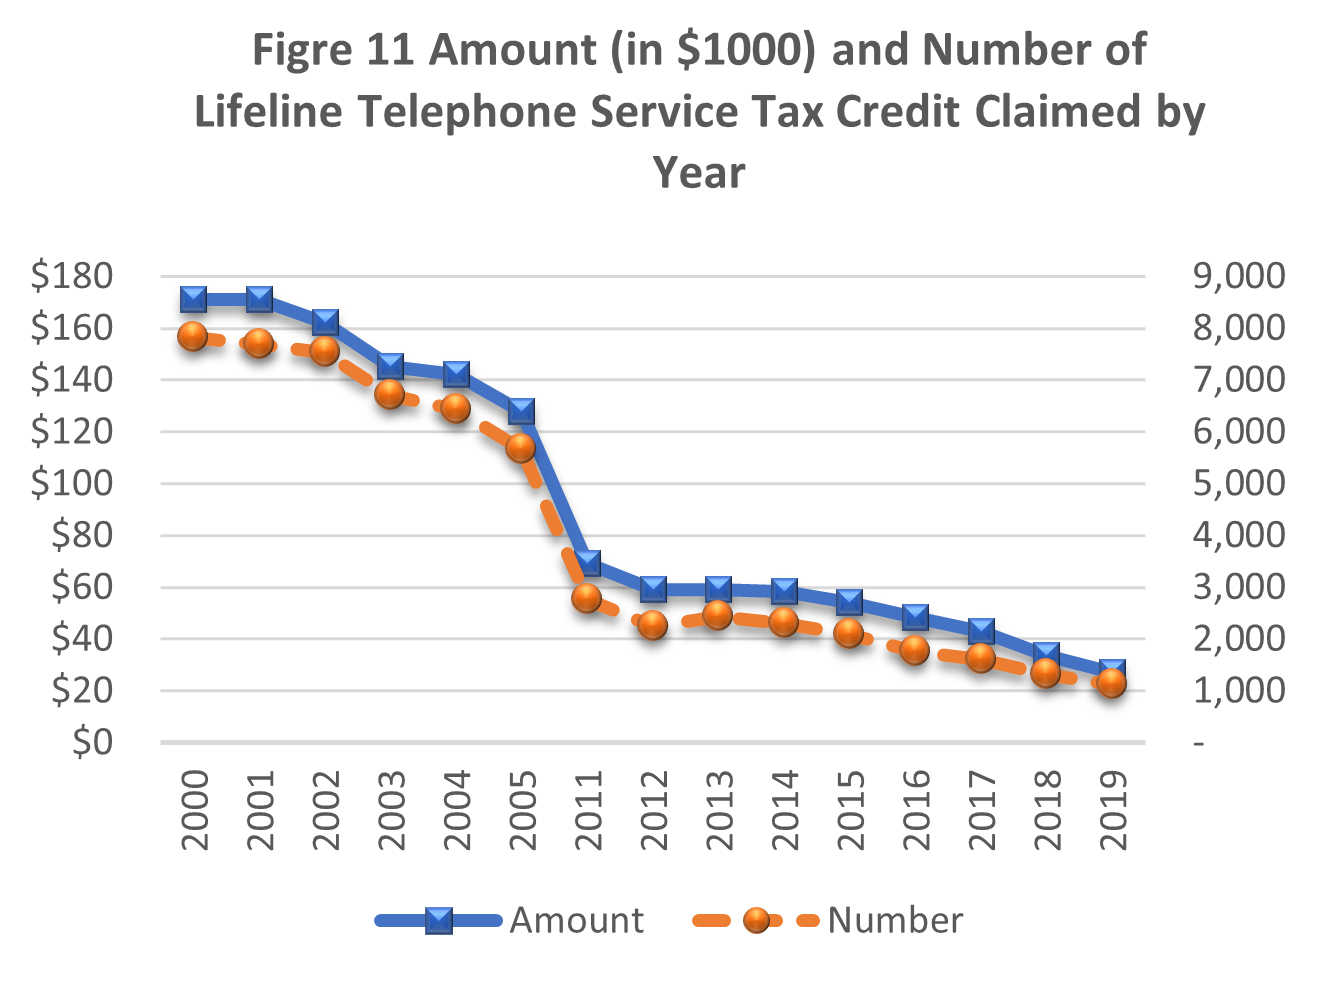  Figure 11 - Amount (in $1000) and Number of  Lifeline Telephone Service Tax Credit Claimed by Year